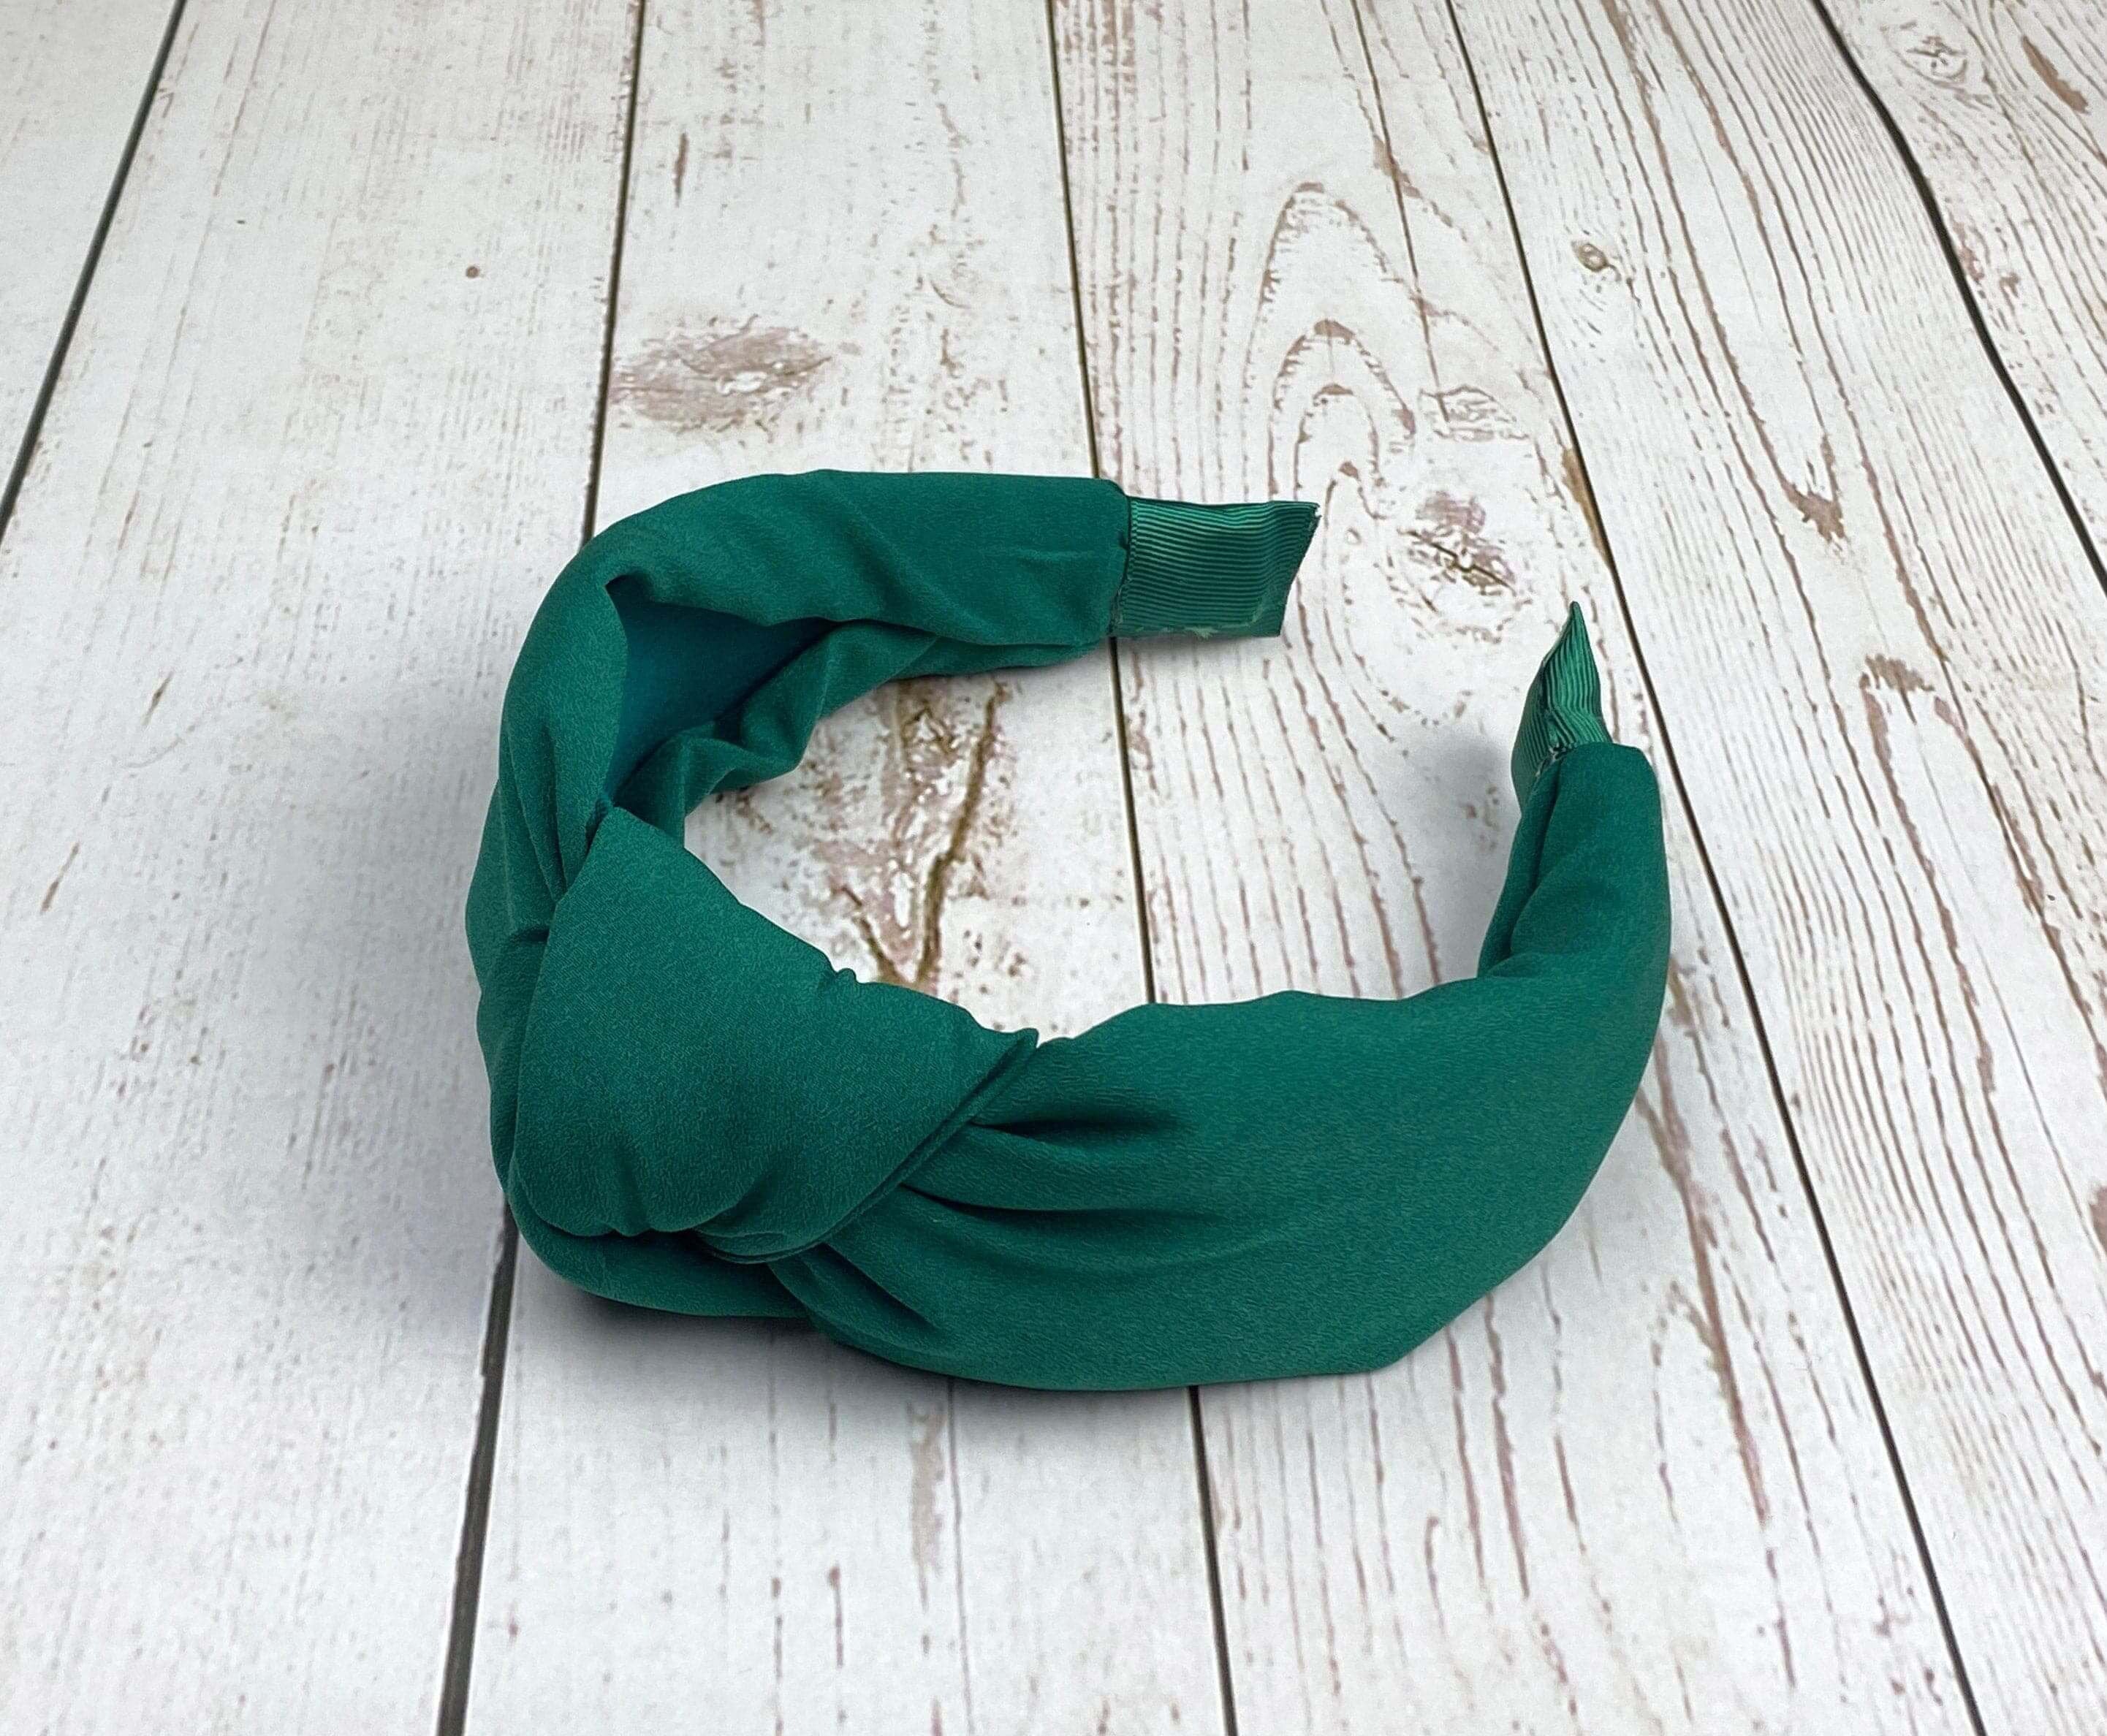 Stay stylish all day long with our range of emerald green tie bands for women. Our tie headbands are made from soft and luxurious green satin fabric that will make you look fabulous!